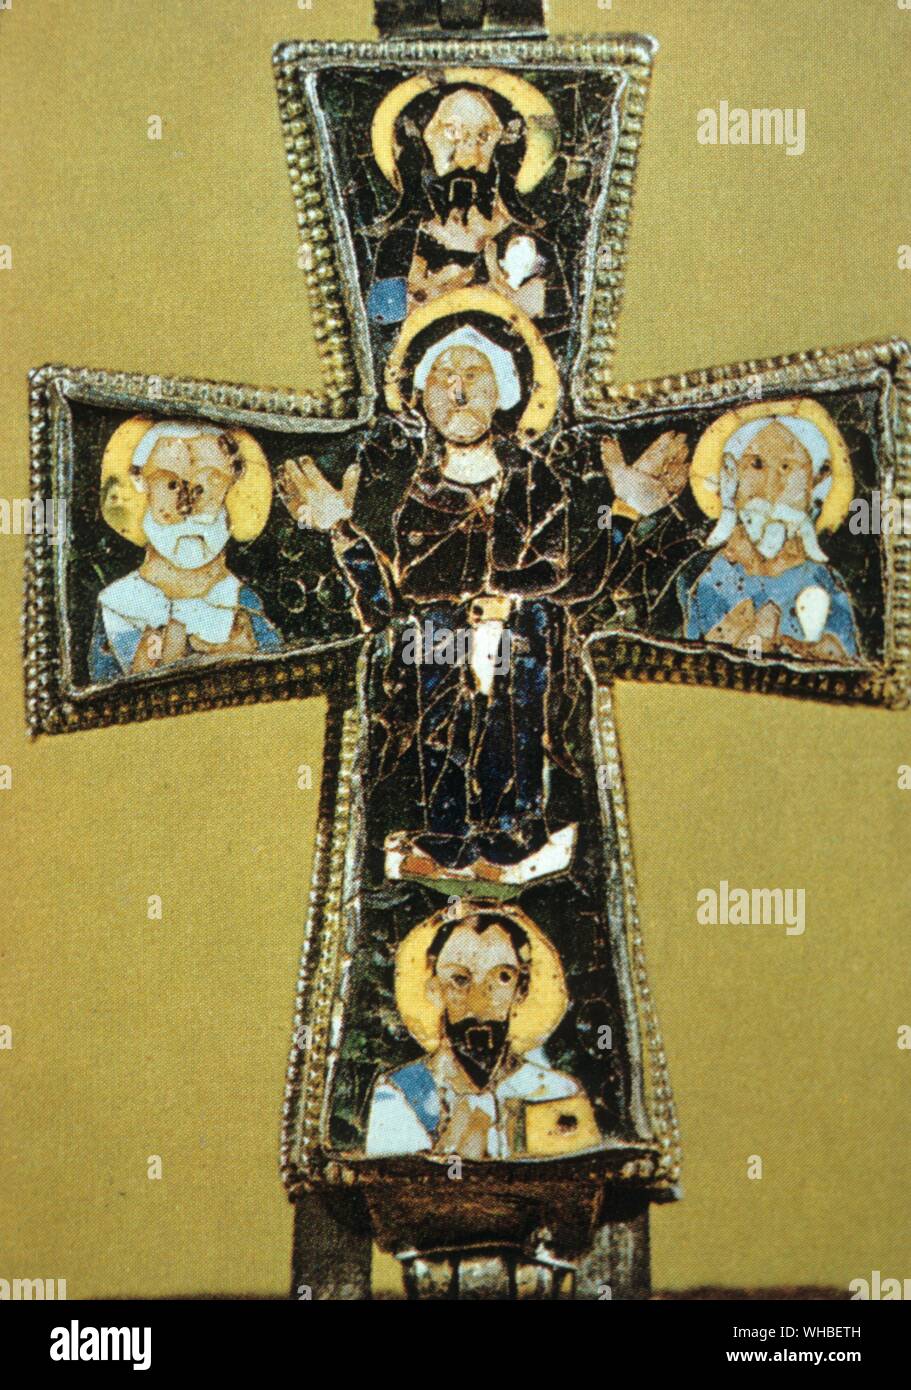 The Beresford Hope Cross : a hollow reliquary cross of Byzantine Art . The relic it contained was probably fragments of the true cross . Victoria and Albert Museum , London . Stock Photo